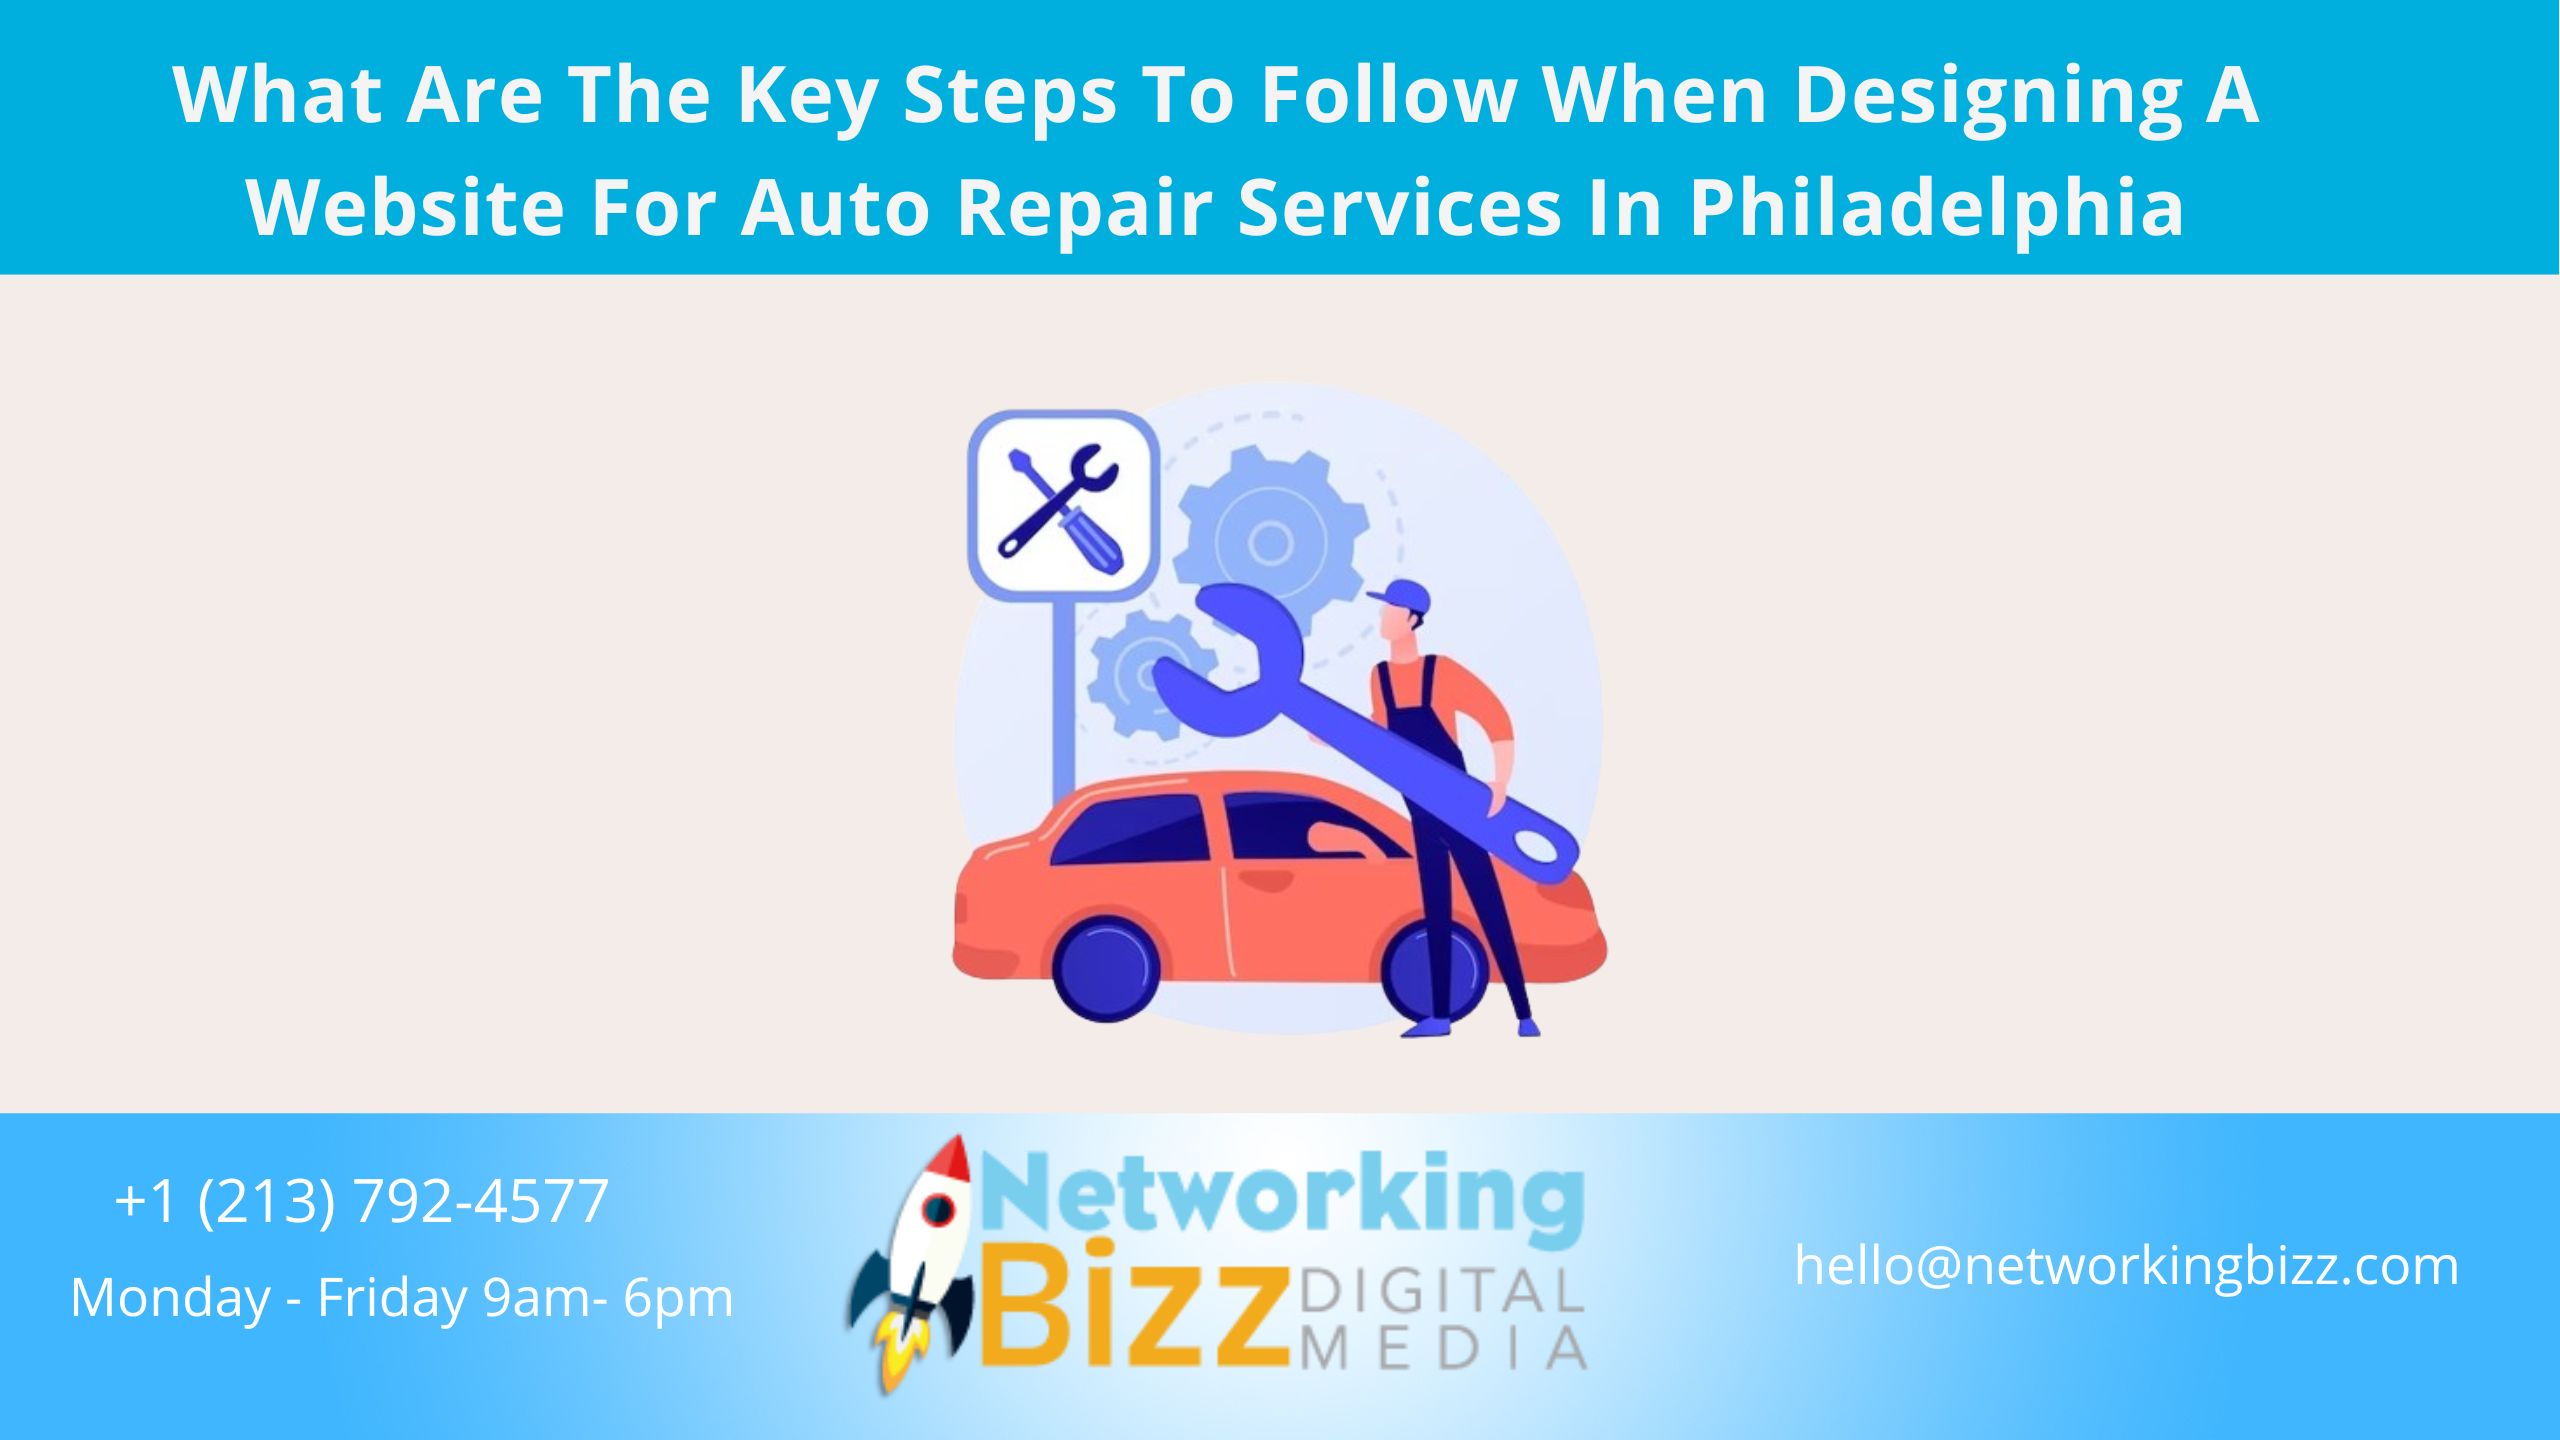 What Are The Key Steps To Follow When Designing A Website For Auto Repair Services In Philadelphia